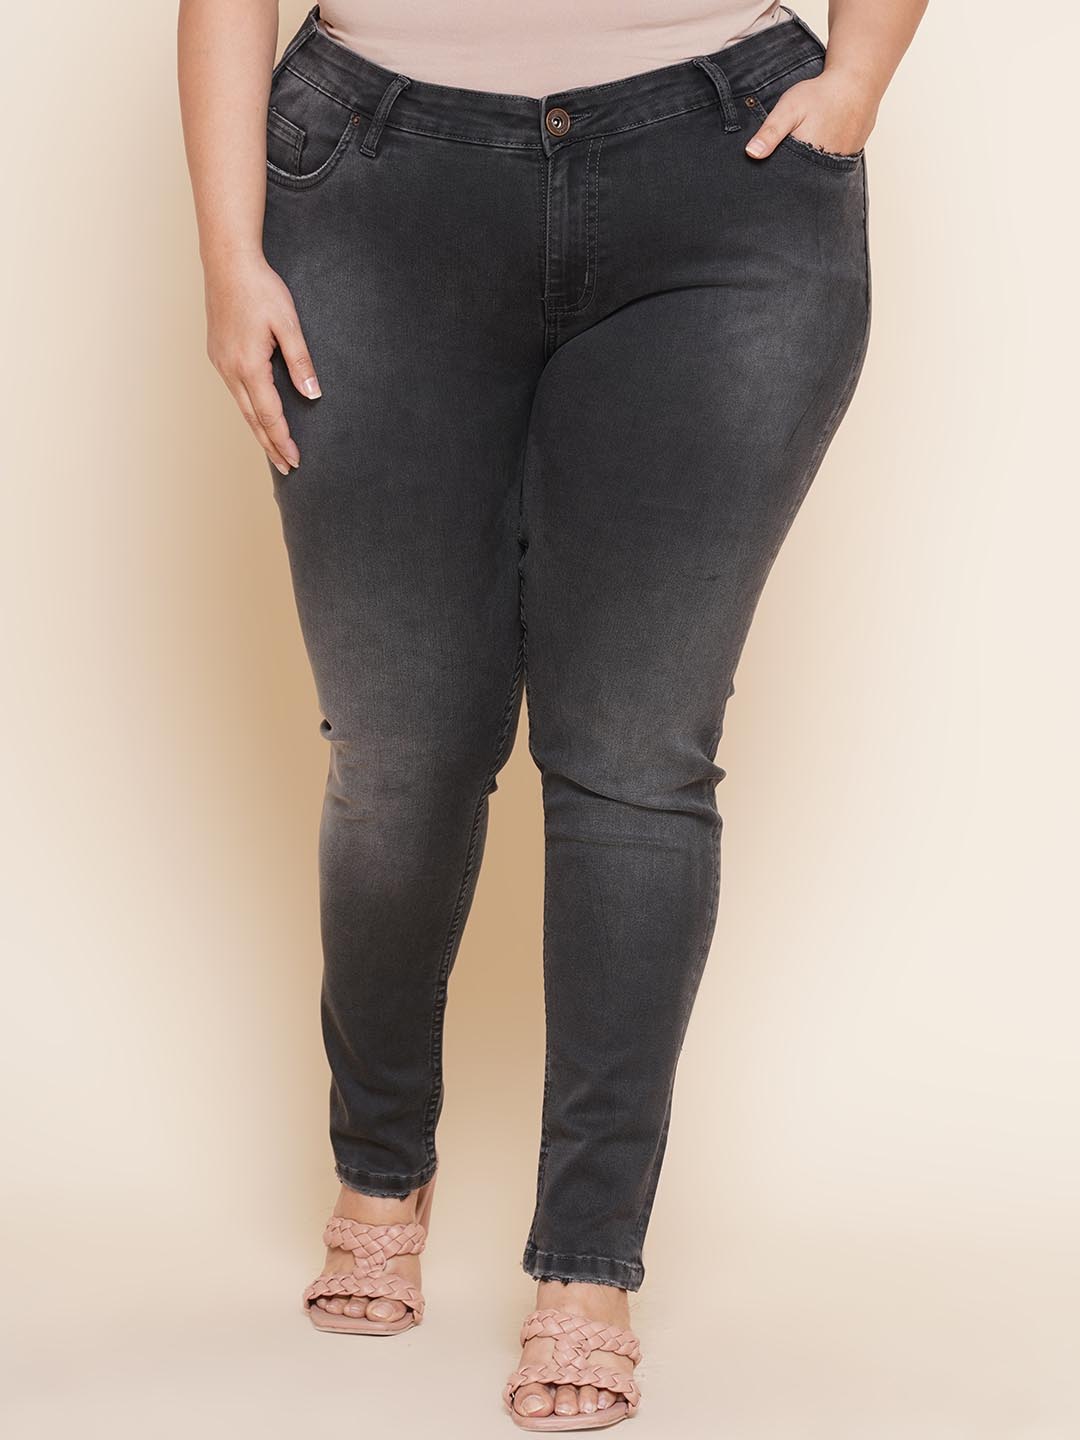 Charcoal Stretchable Jeans